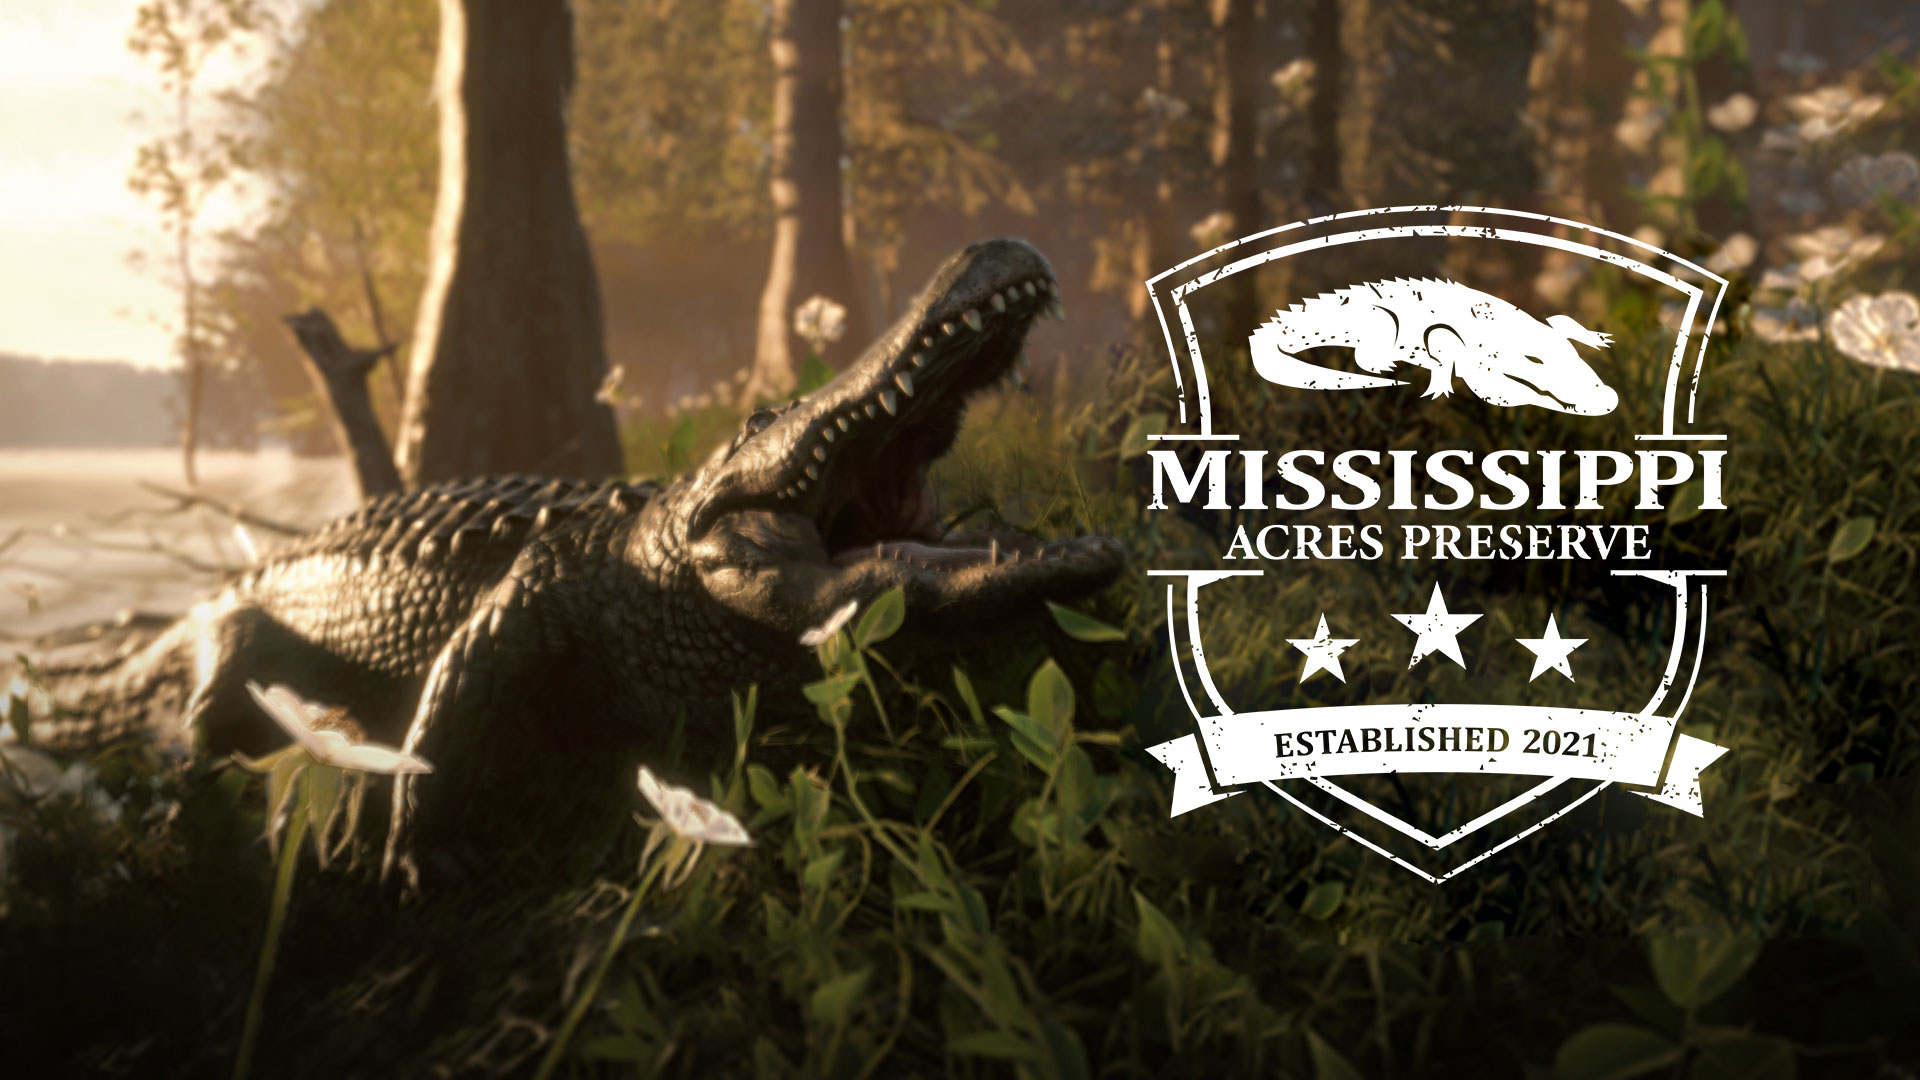 Video For Find Your Next Hunting Adventure in Mississippi Acres Preserve, Out Today for theHunter: Call of the Wild